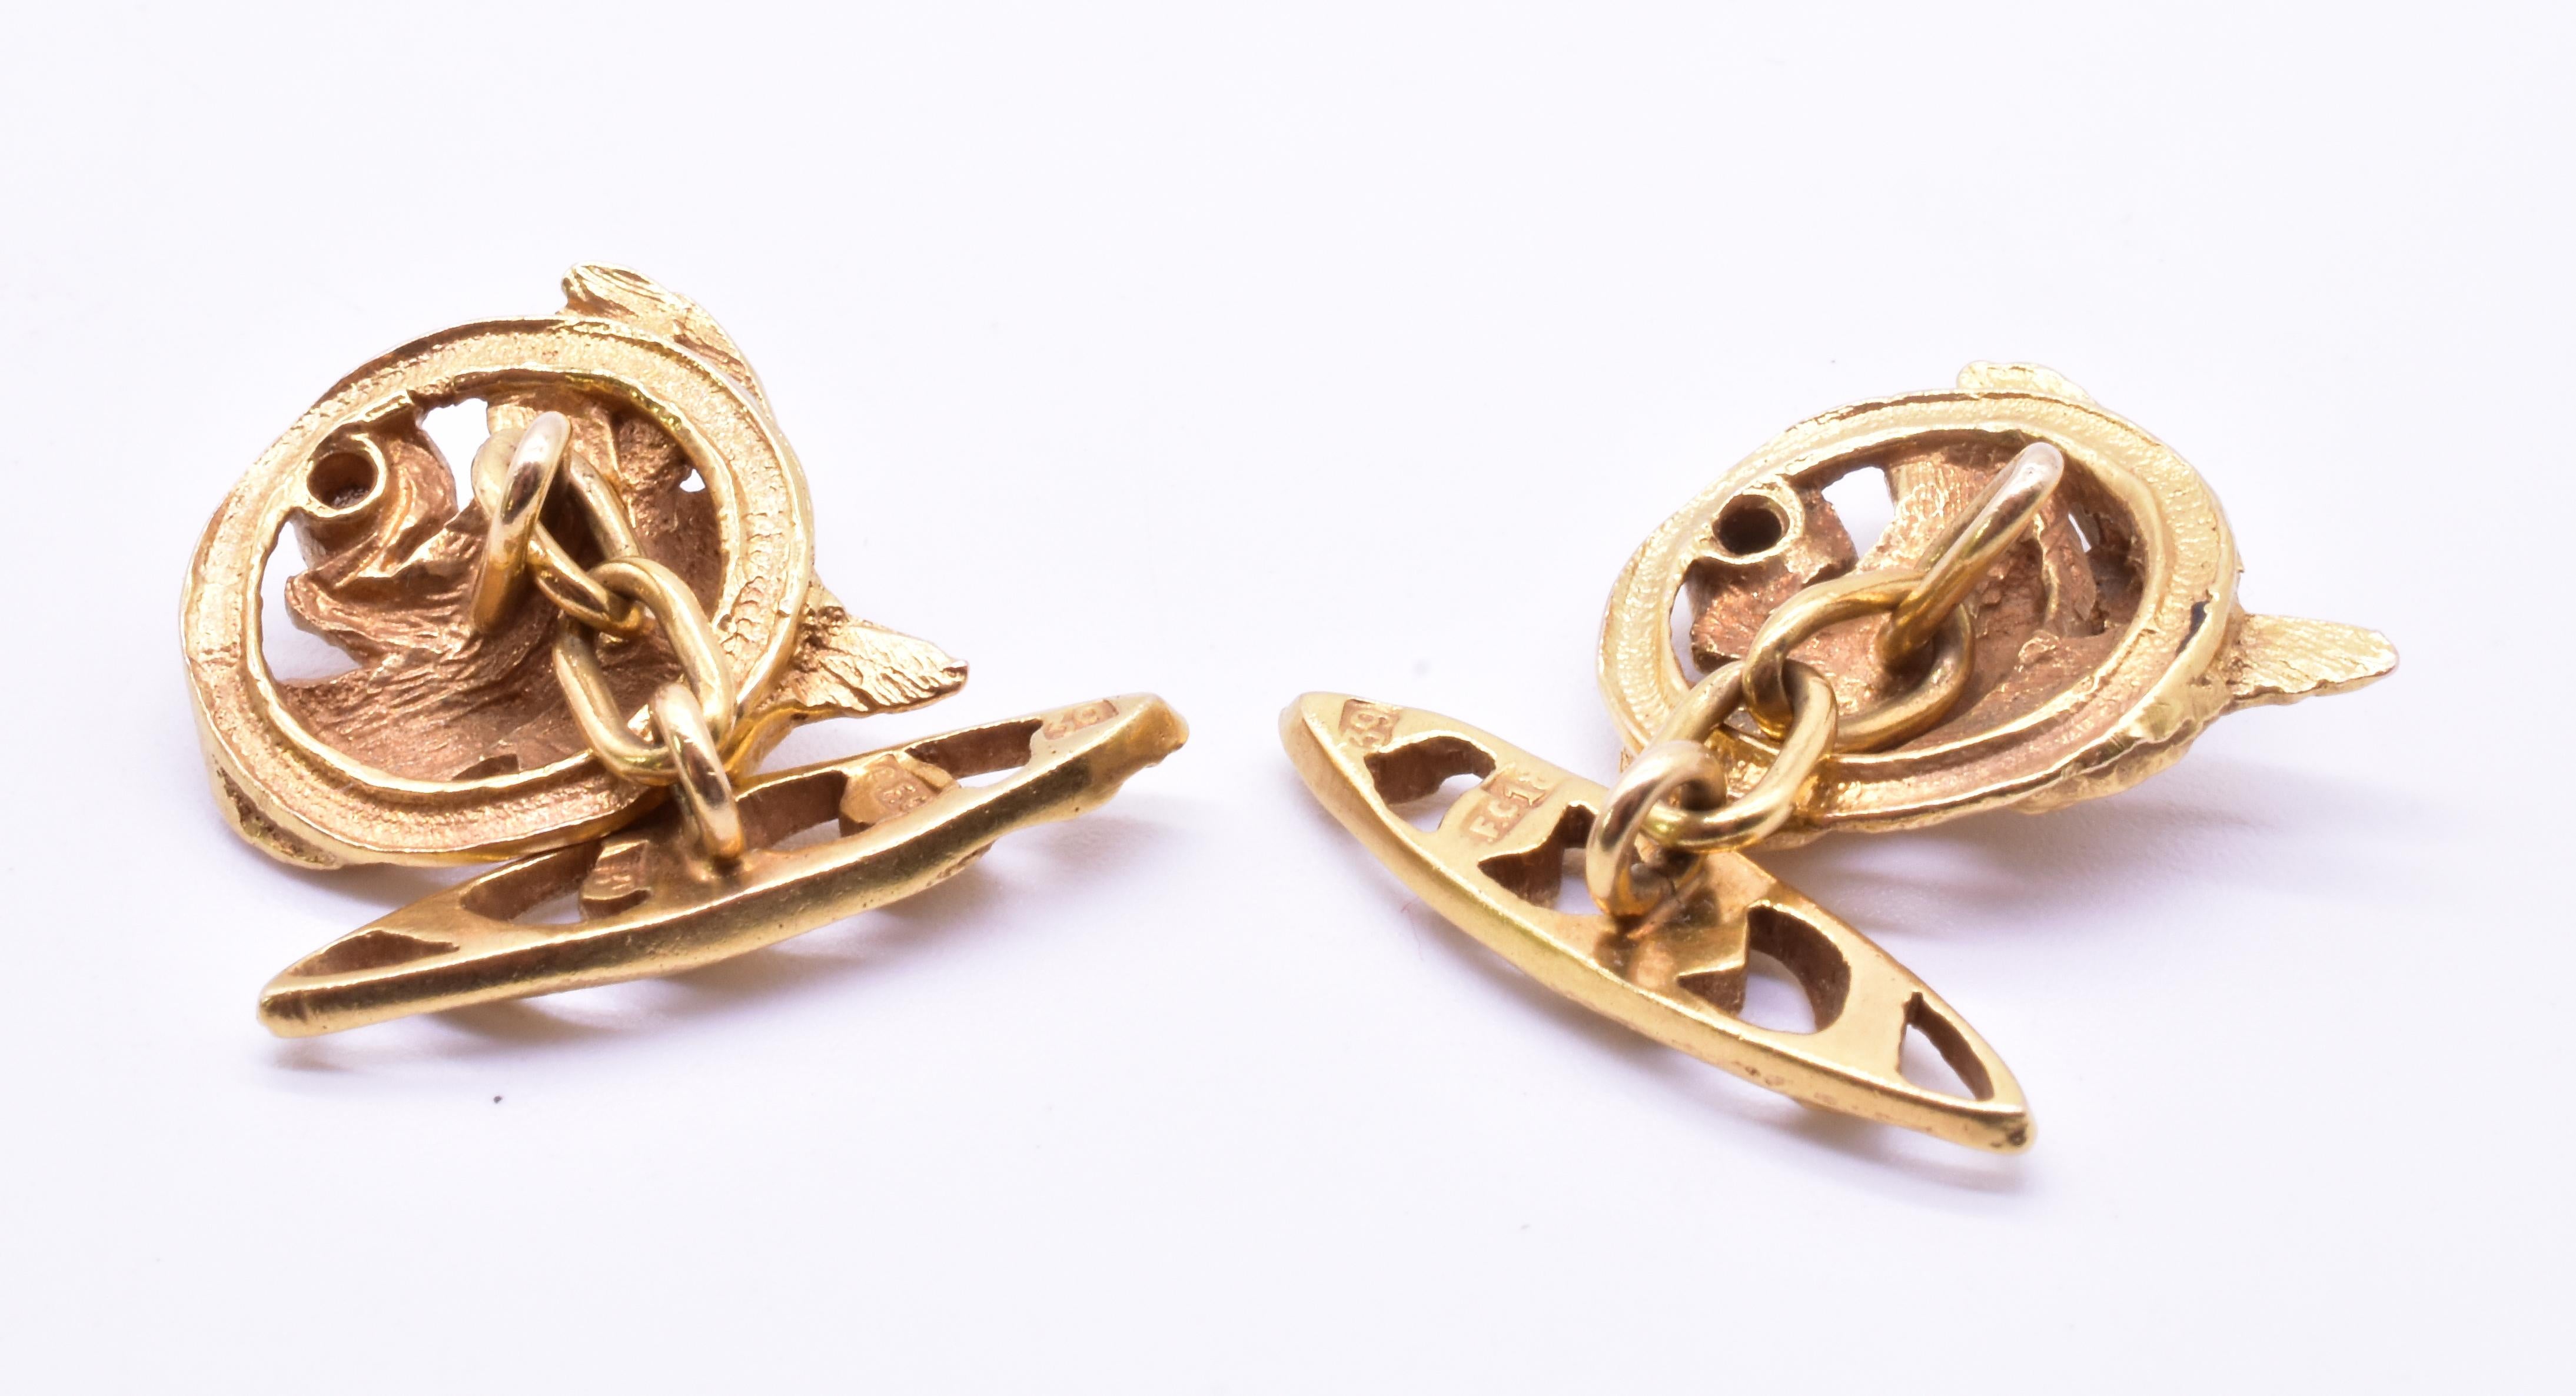 Stunning 18K gold and diamond cufflinks, c1900, depicting eagles. Eagles are often scene in mythological scenes w Zeus, the King of the gods, as a symbol of his strength and power. 

The cufflinks are hallmarked w the initials FC, referring to